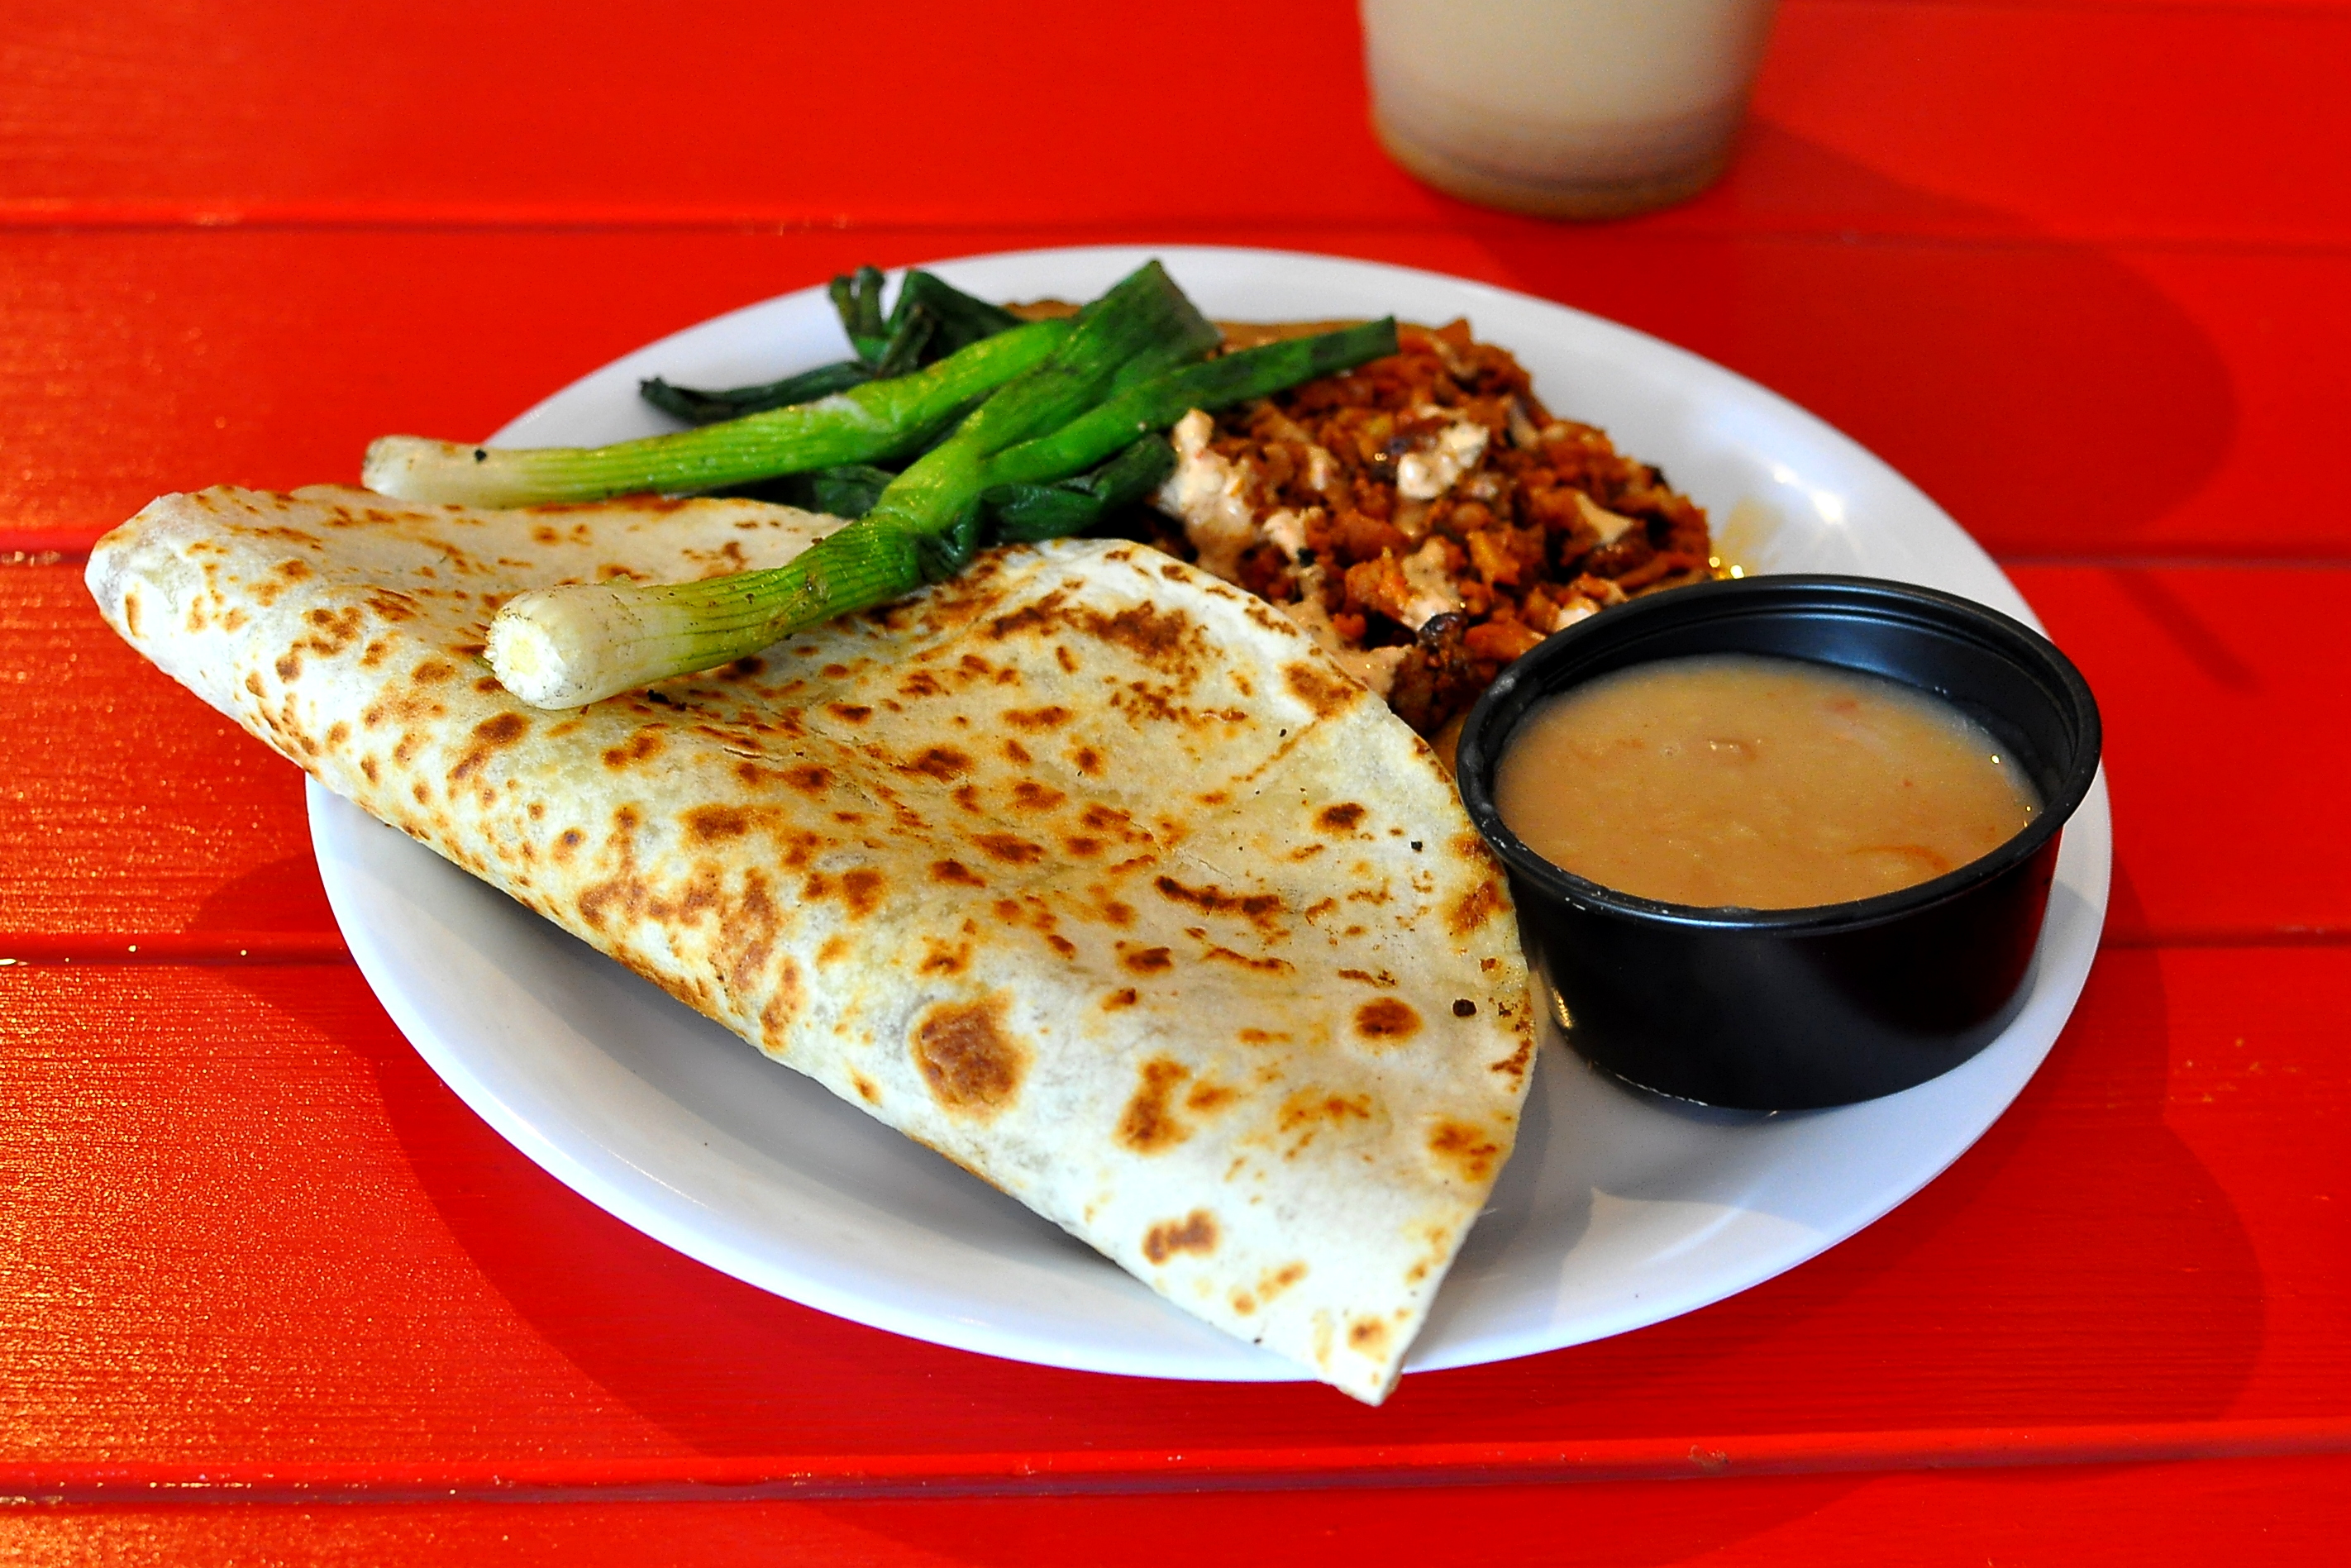 A quesadilla and vampiro on a bright red table at a Mexican restaurant.